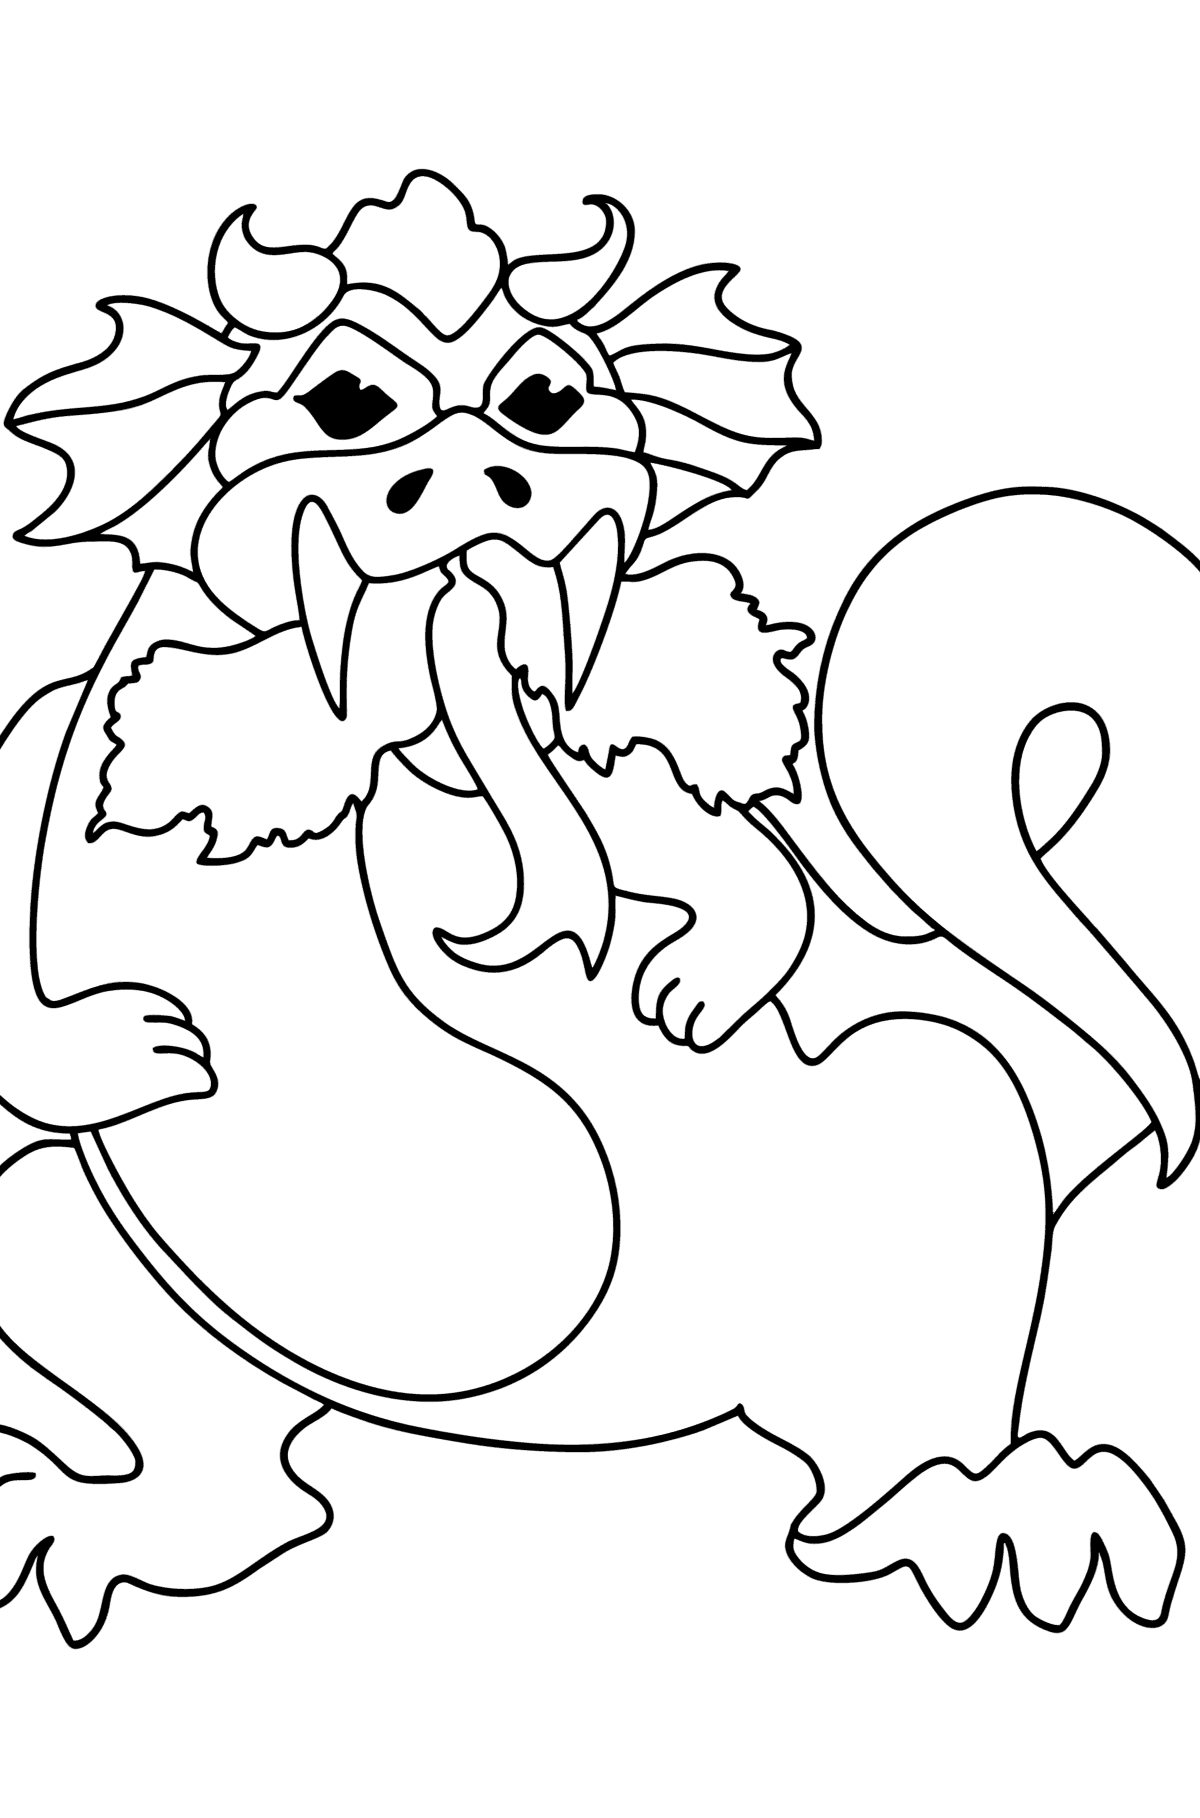 The dragon starts fire coloring page - Coloring Pages for Kids